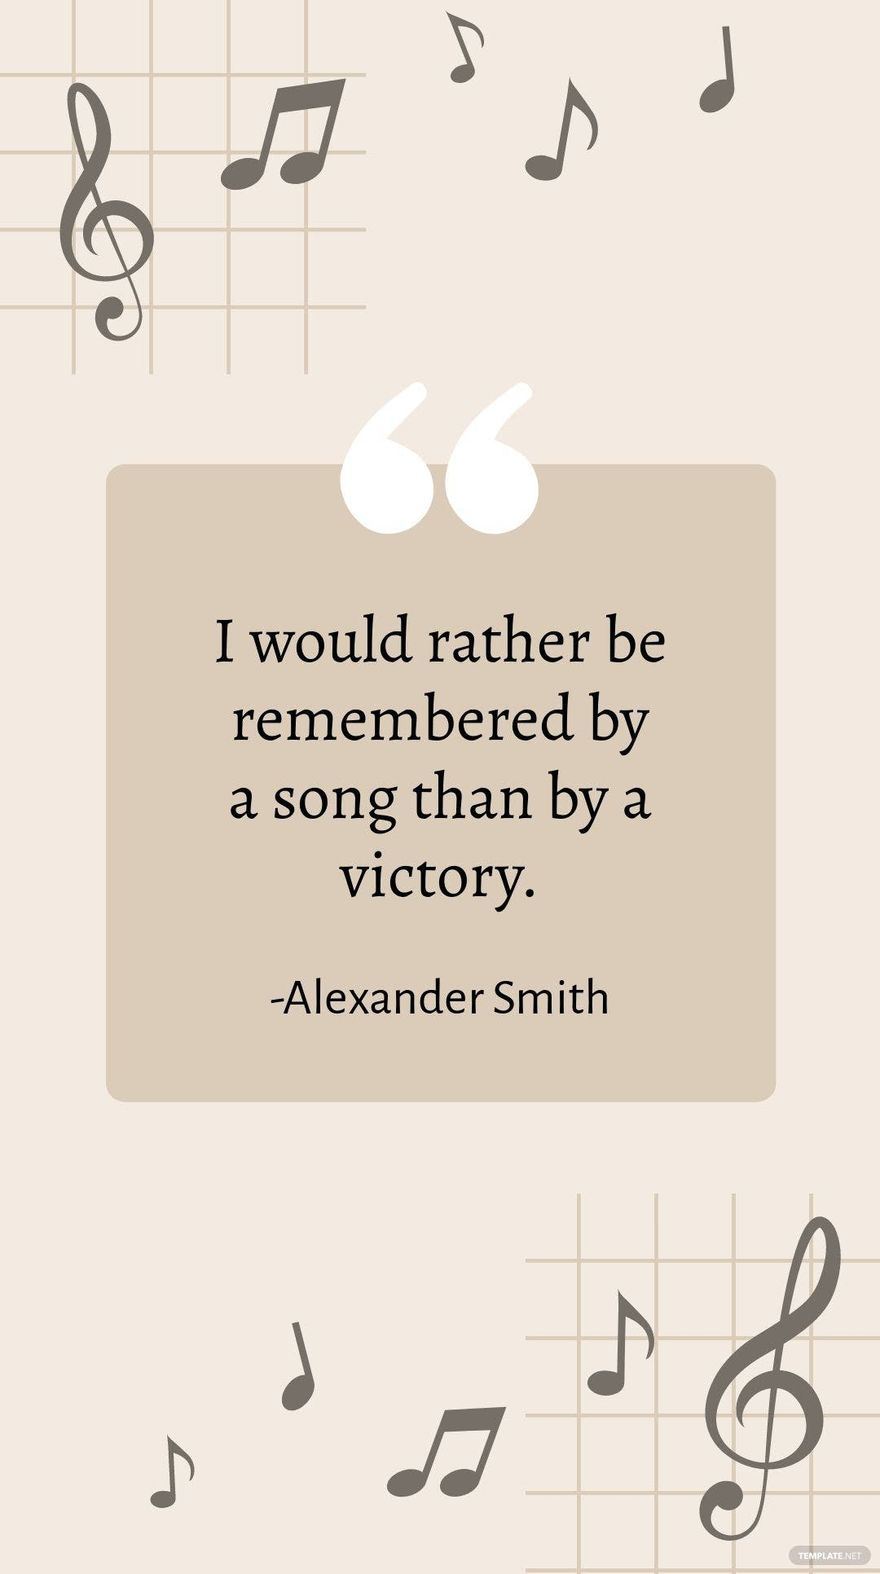 Alexander Smith - I would rather be remembered by a song than by a victory. 